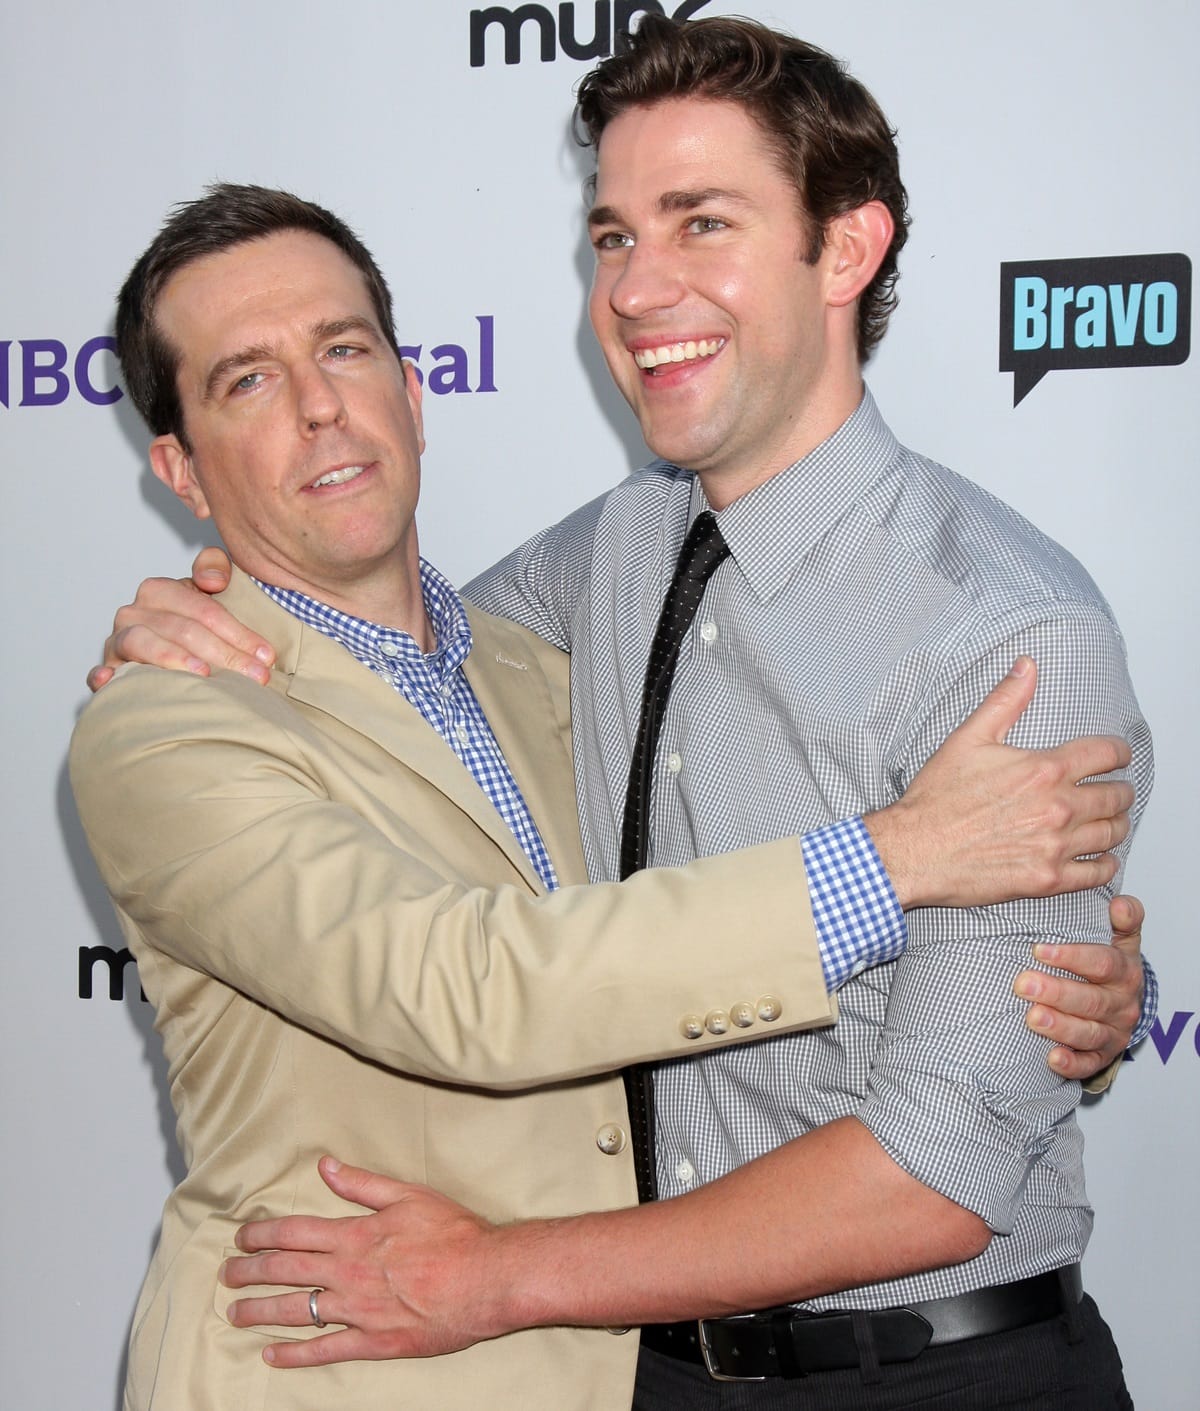 John Krasinski stands at 6ft 2 ½ (189.2 cm), making him taller than Ed Helms, who is 5ft 11 ½ (181.6 cm), by approximately 3 inches